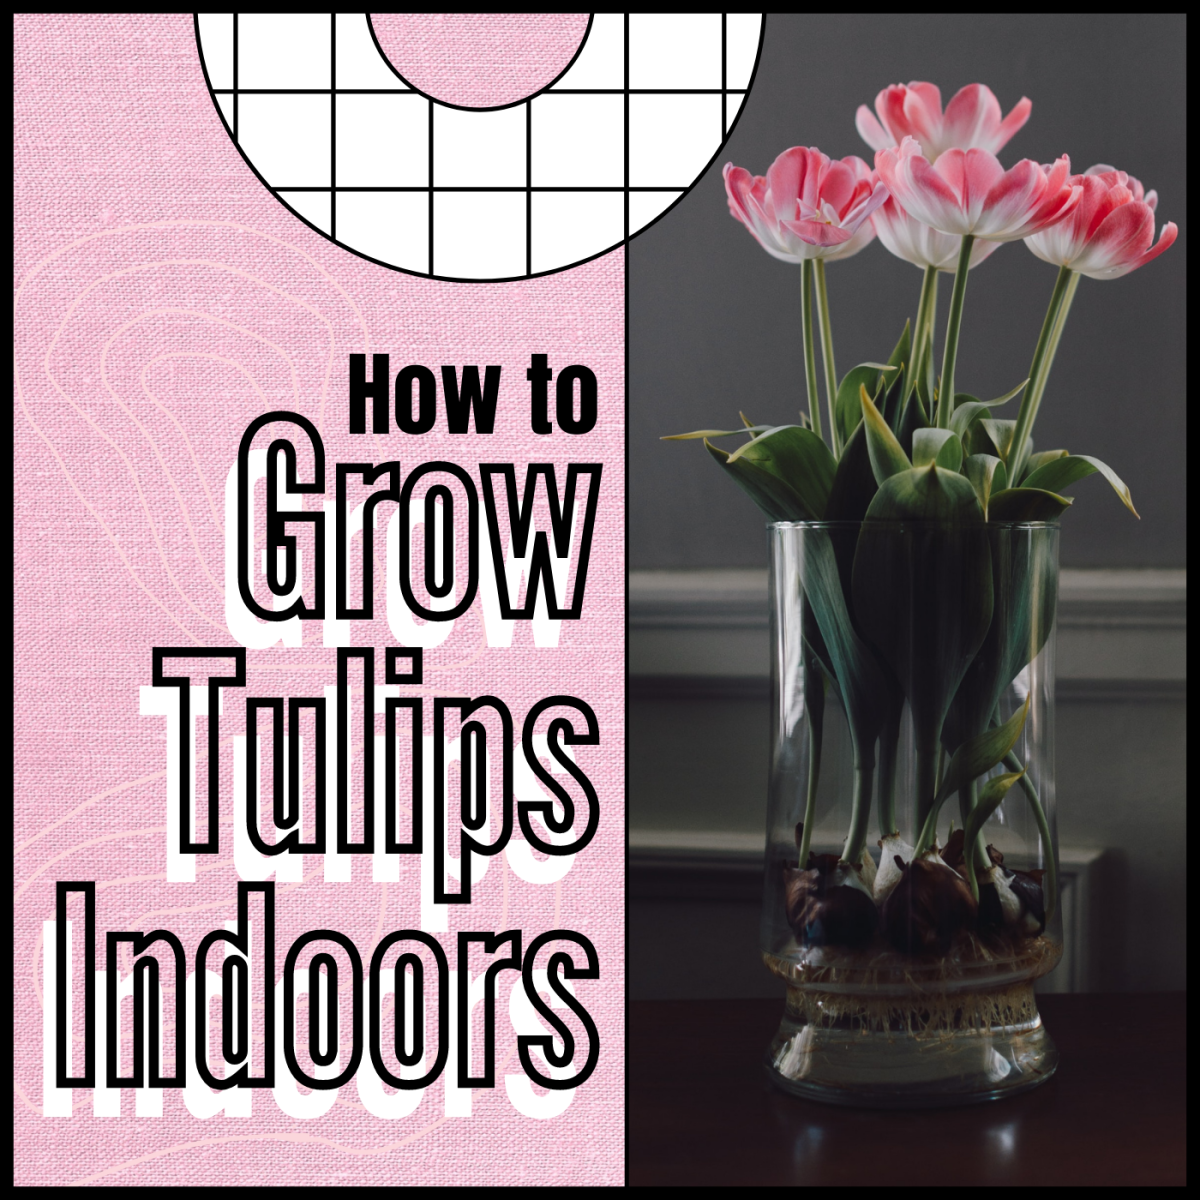 Learn how to grow tulips from bulbs in glass jars.